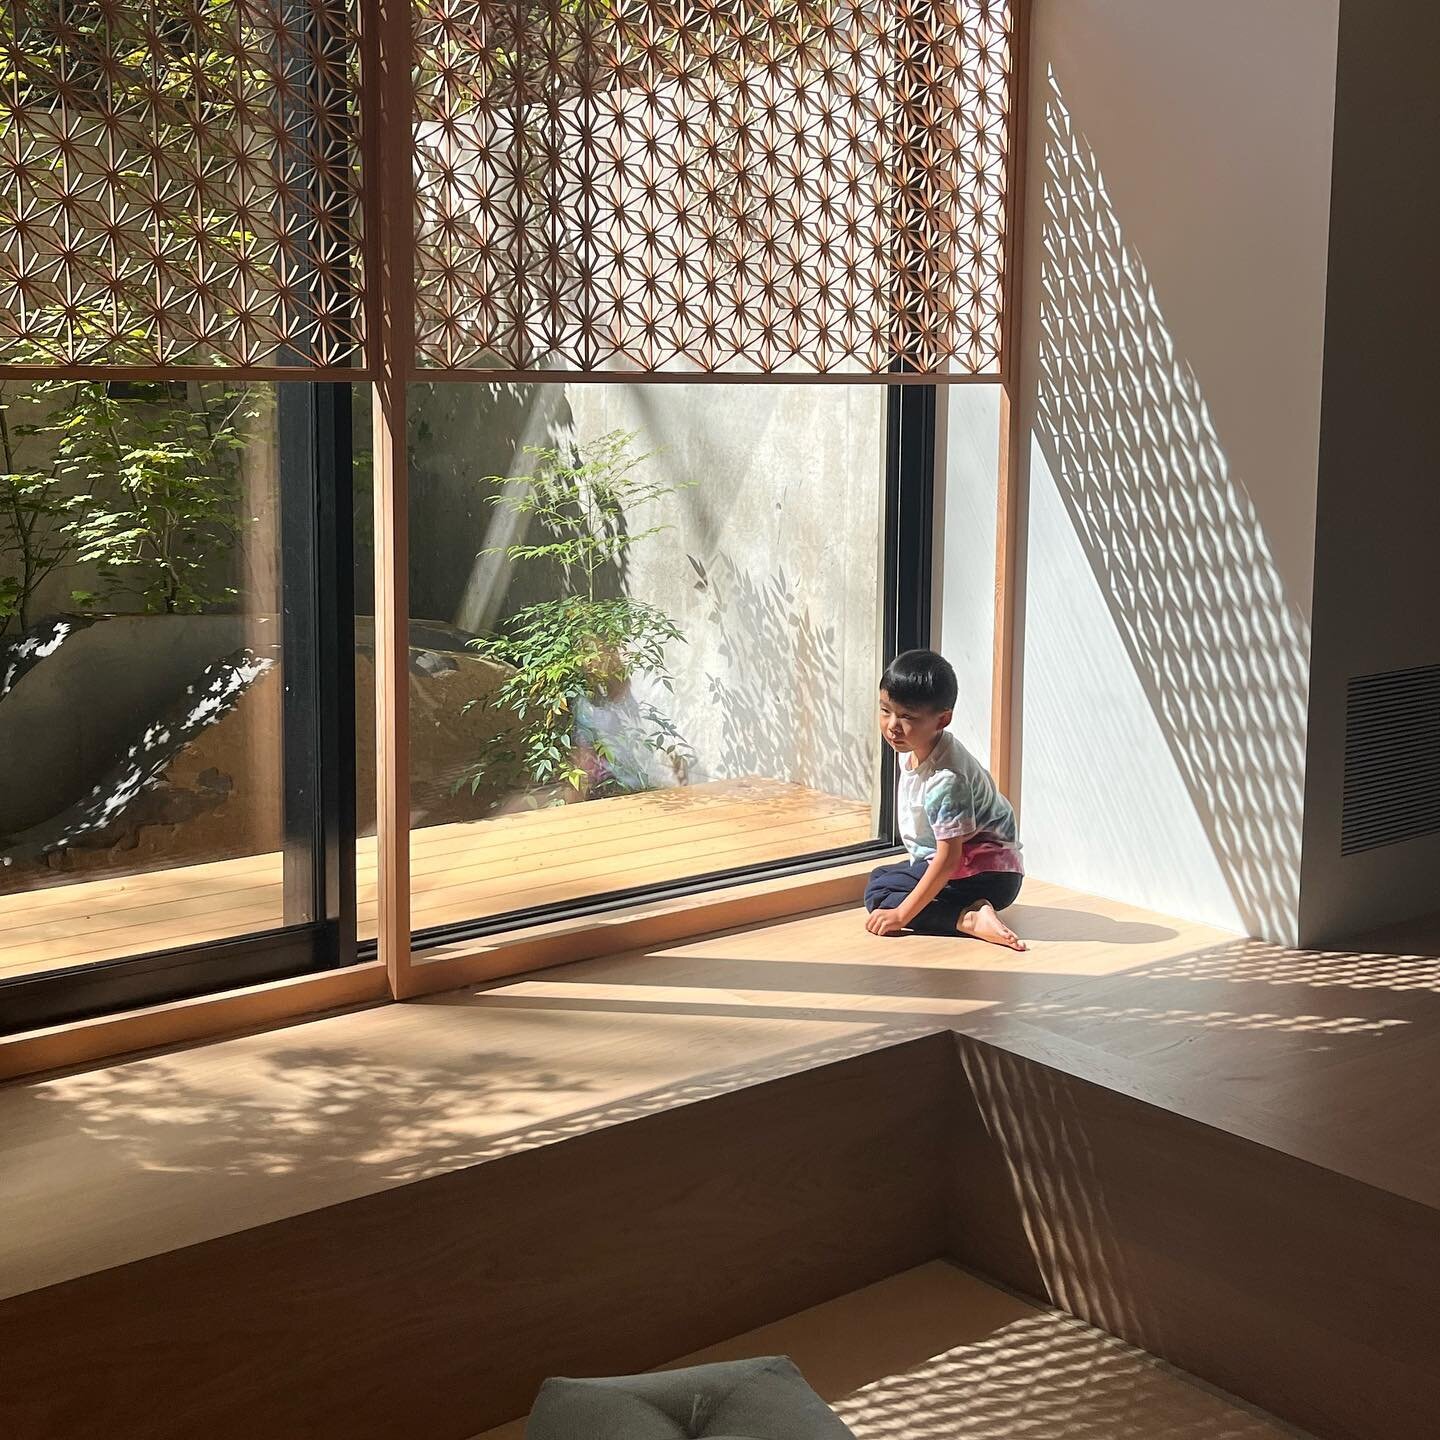 Looking forward to showing you more of our completed West 36th project in Vancouver which is being photographed today by @emaphotographi  The model in the photo will have the good fortune of spending some formative years in a house that mom and dad p